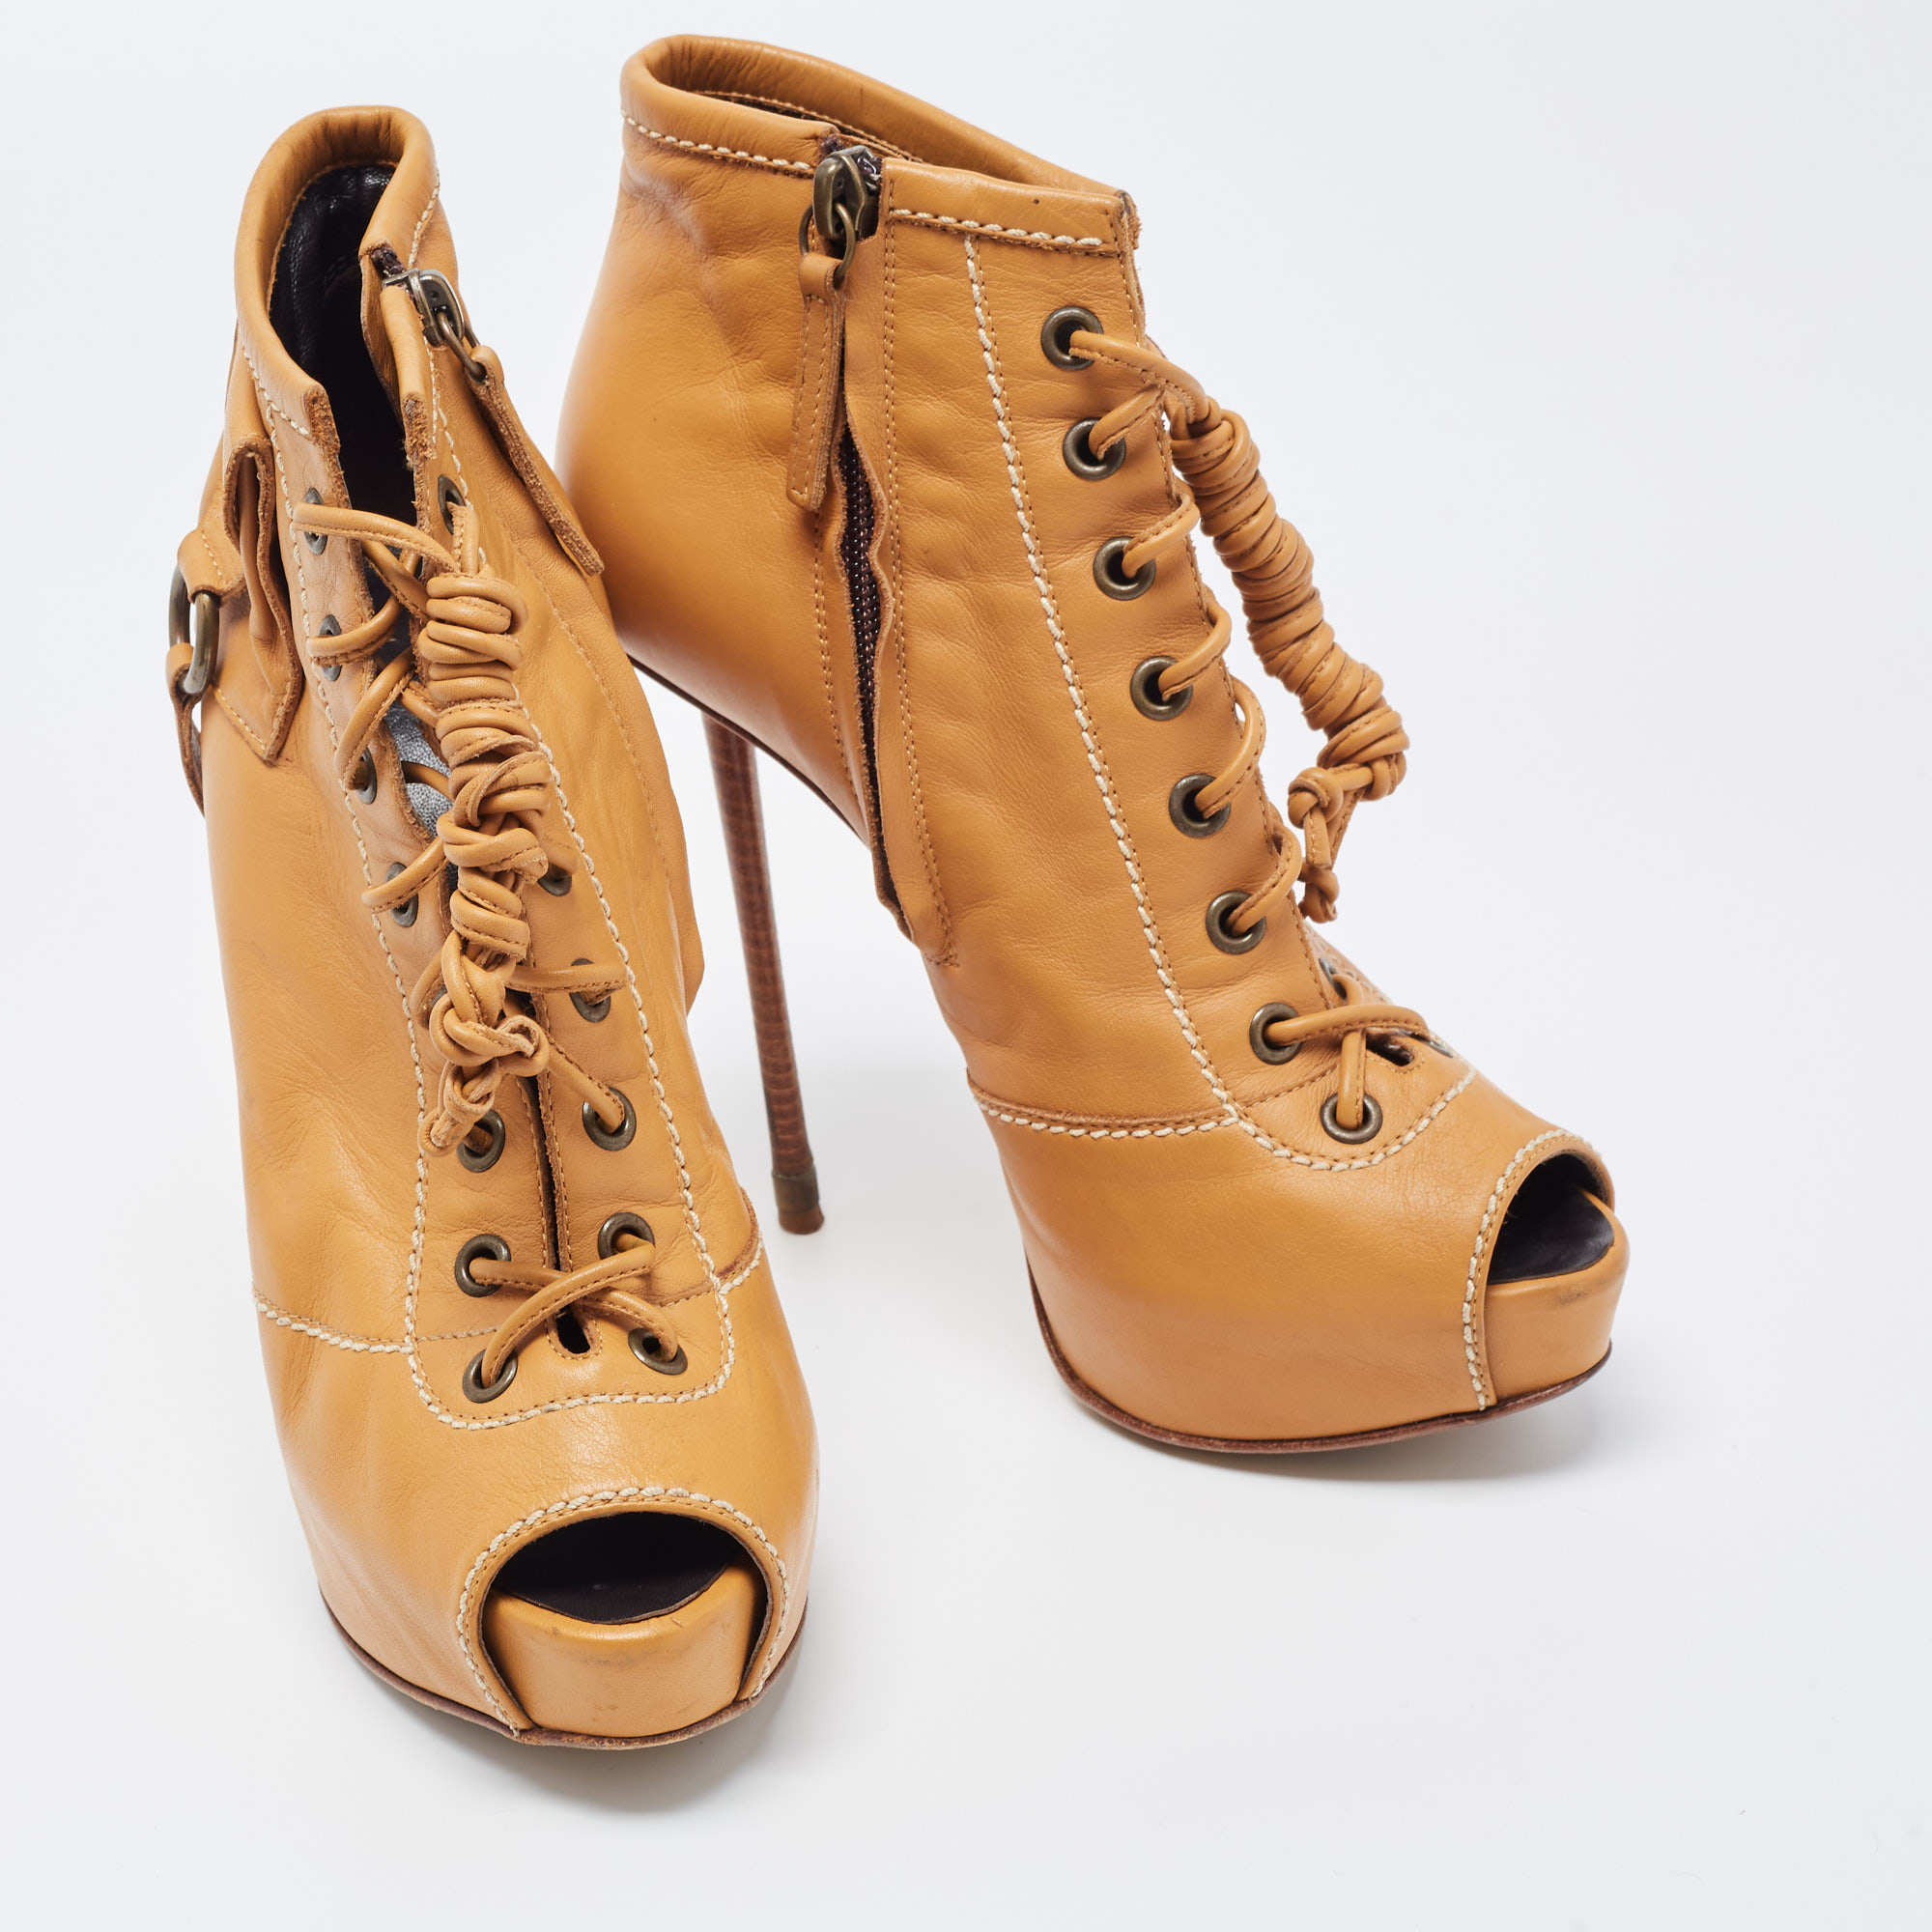 Giuseppe Zanotti Brown Leather Peep Toe Lace Up Ankle Boots Size 36